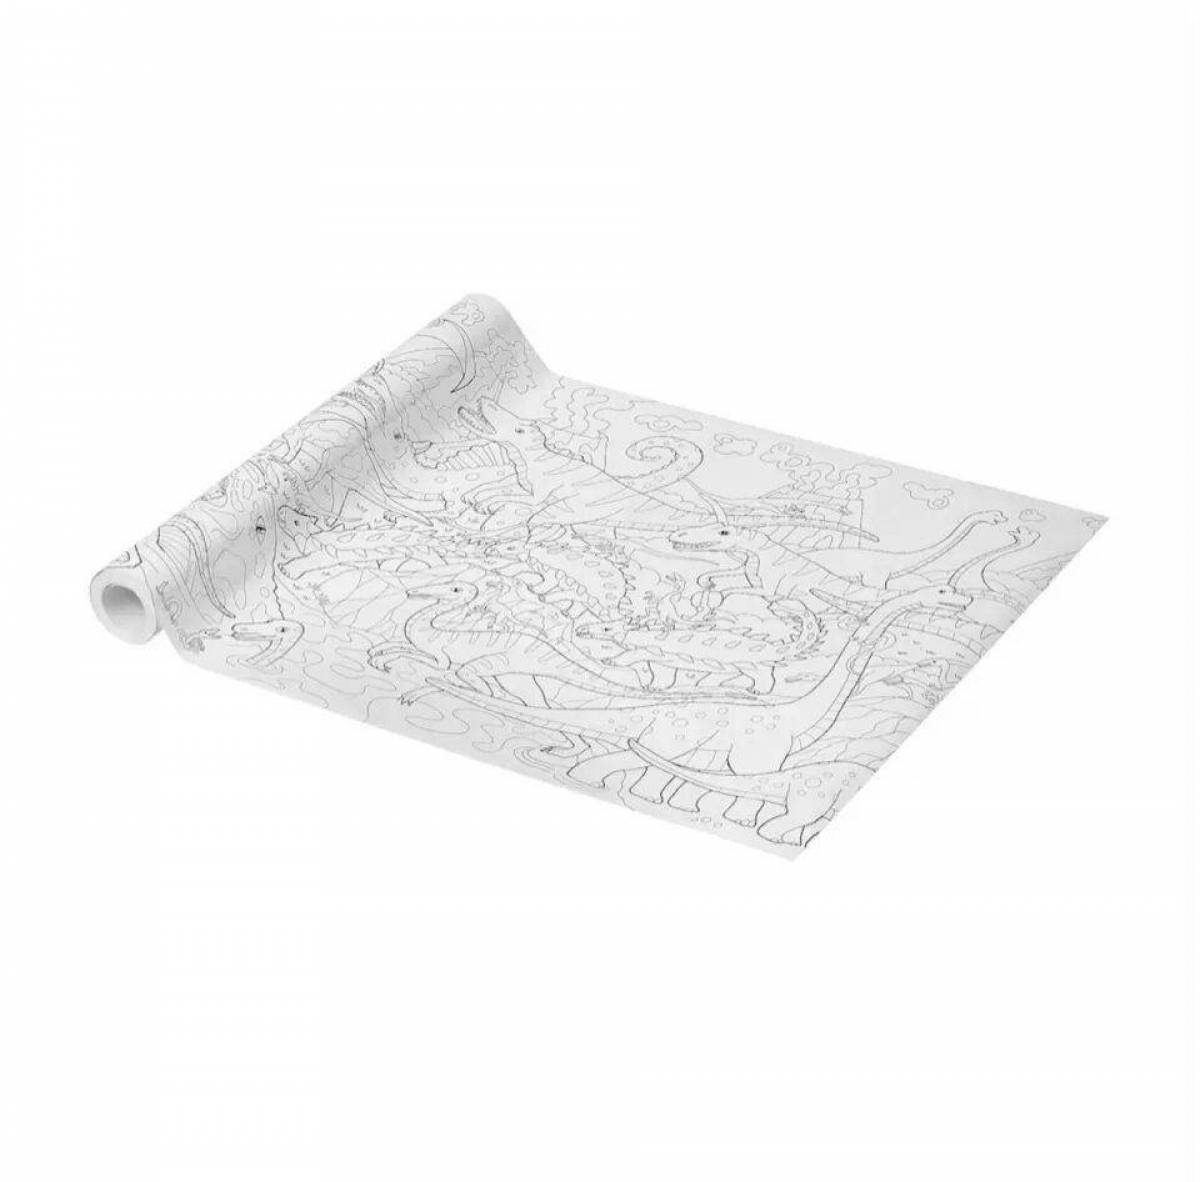 Ikea fancy coloring book on a roll